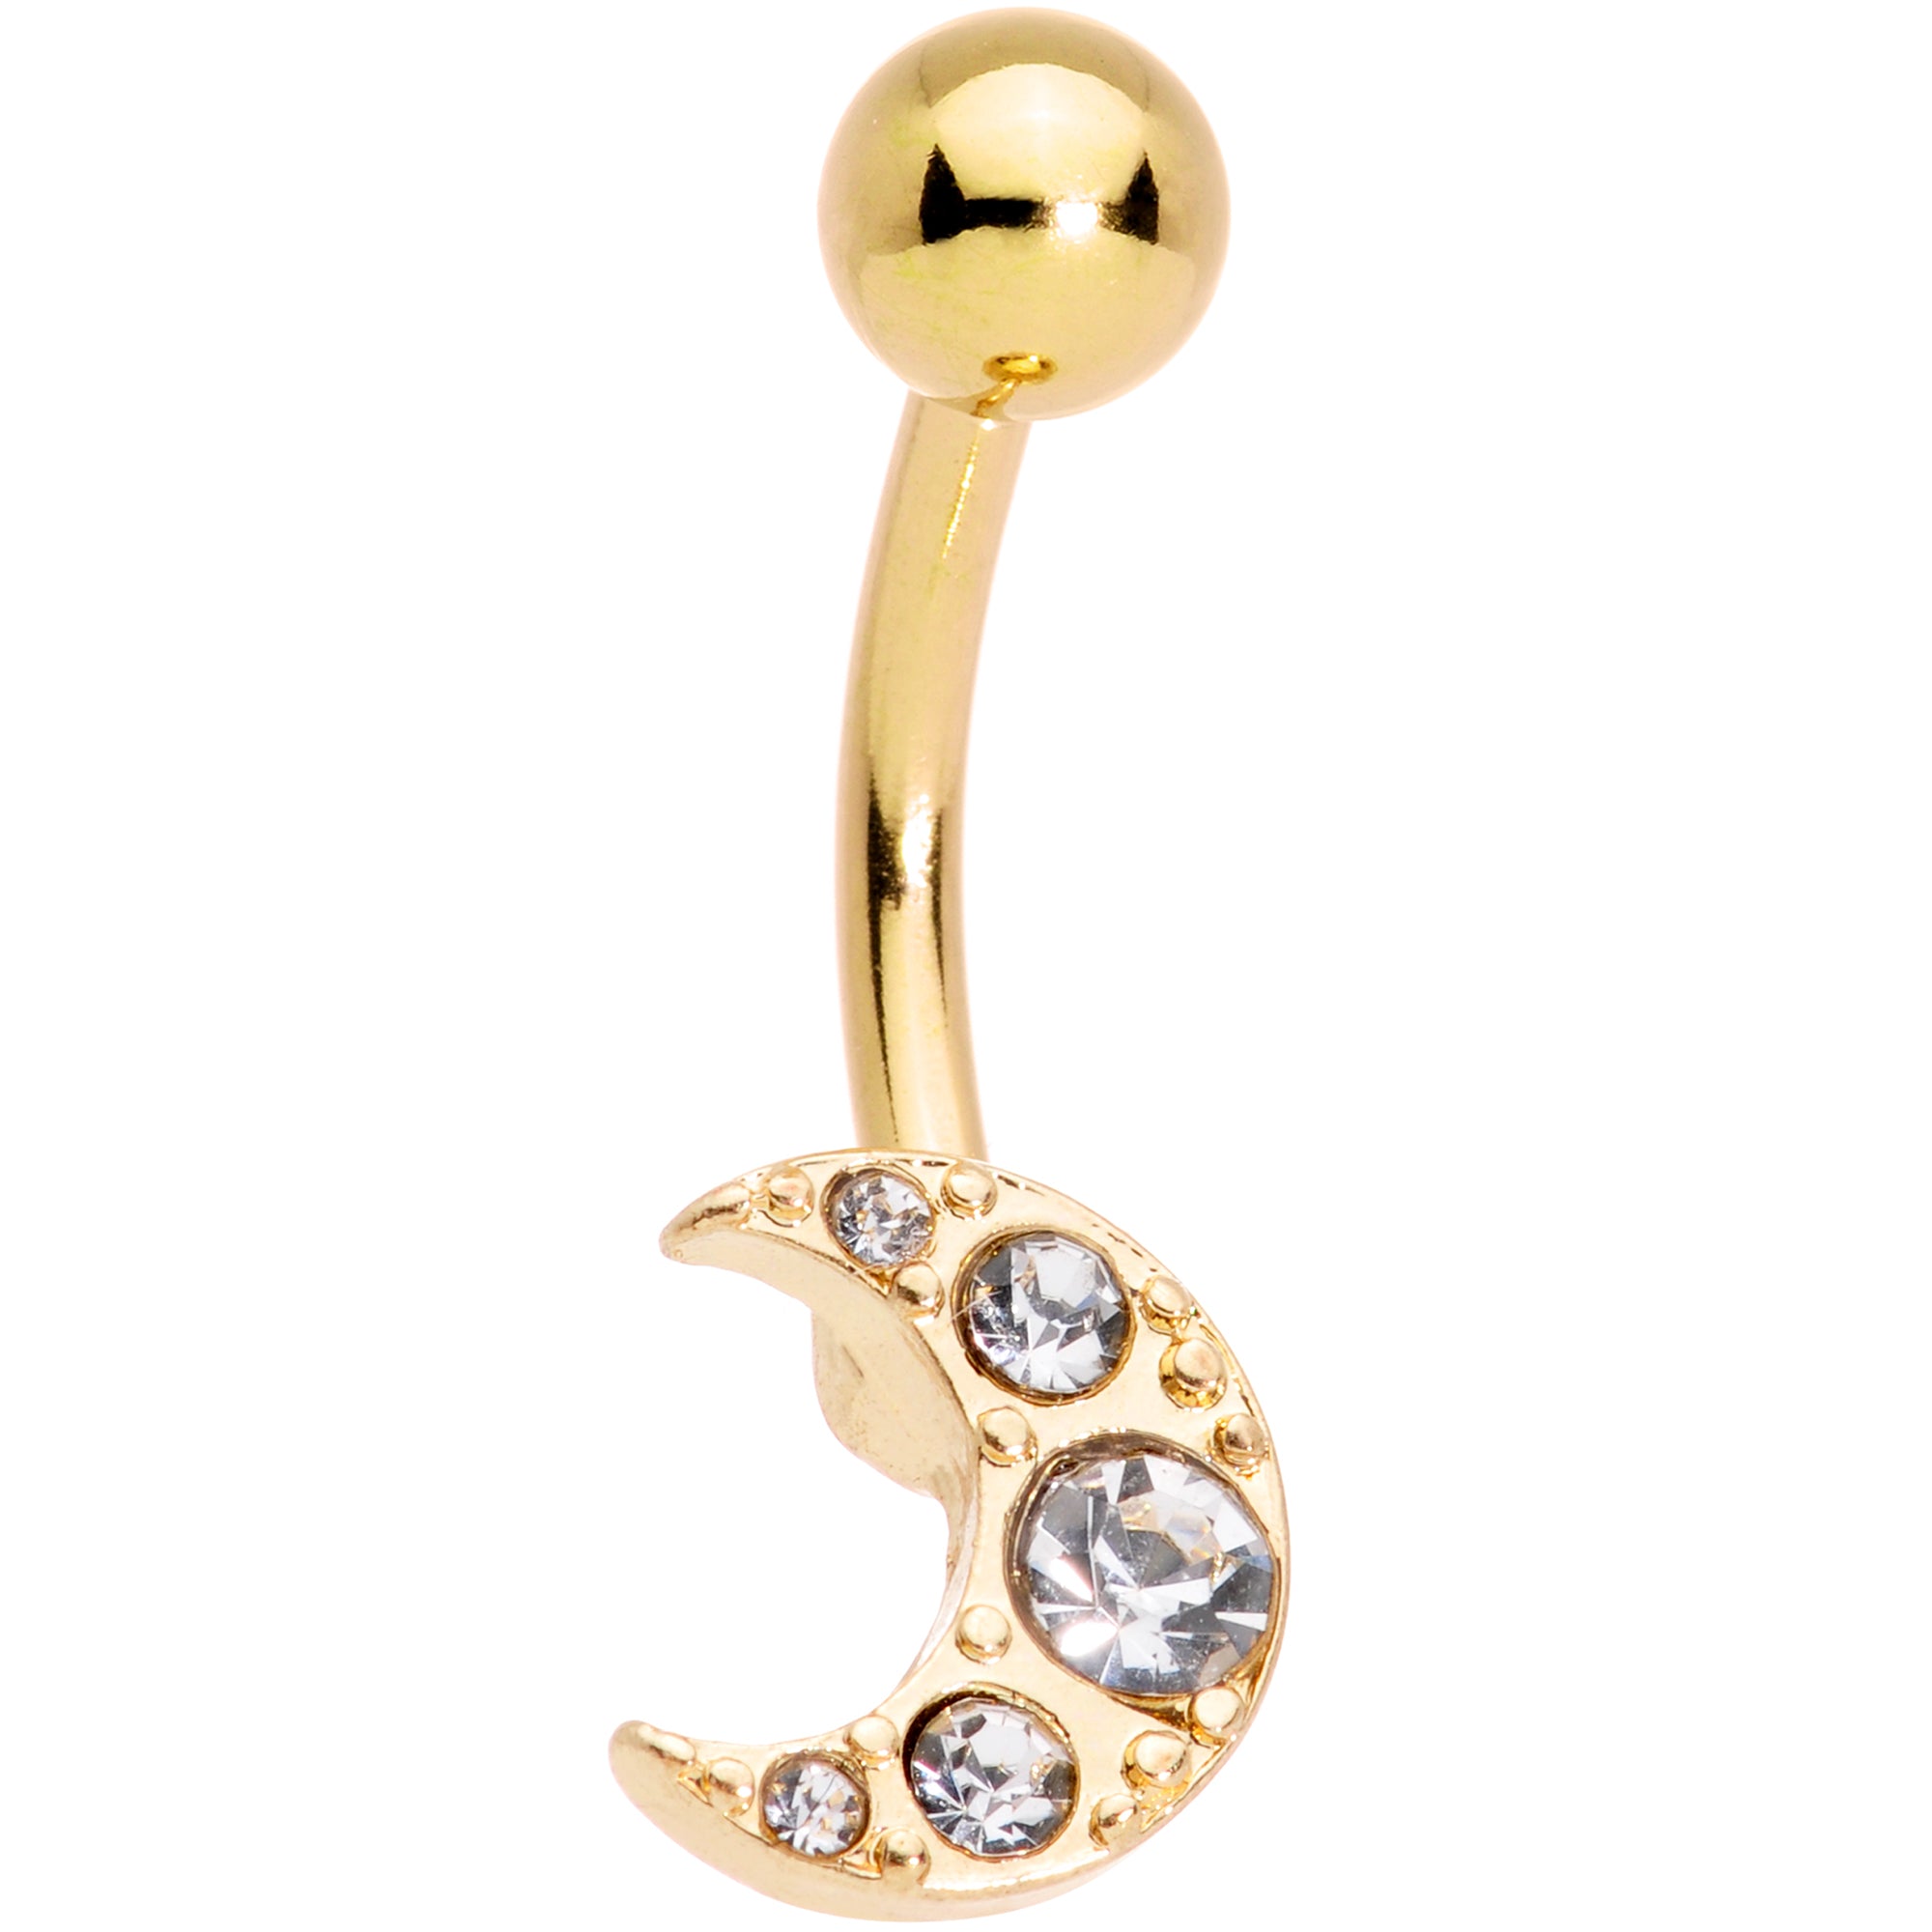 Clear Gem Gold Tone Celestial Moon Star Belly Ring Set of 3